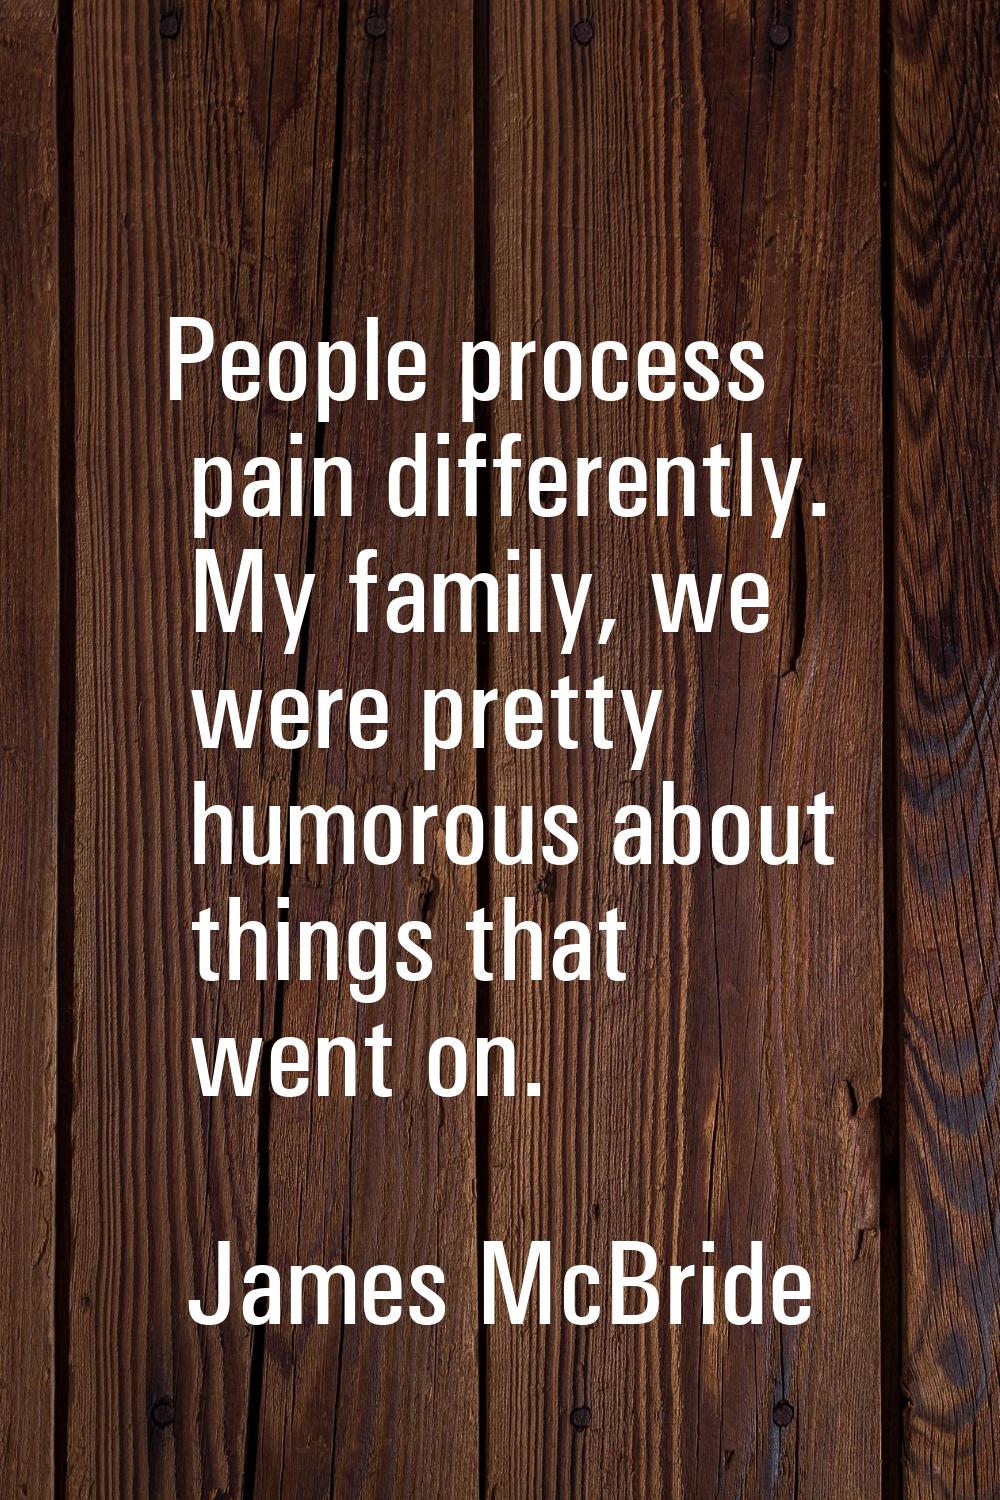 People process pain differently. My family, we were pretty humorous about things that went on.